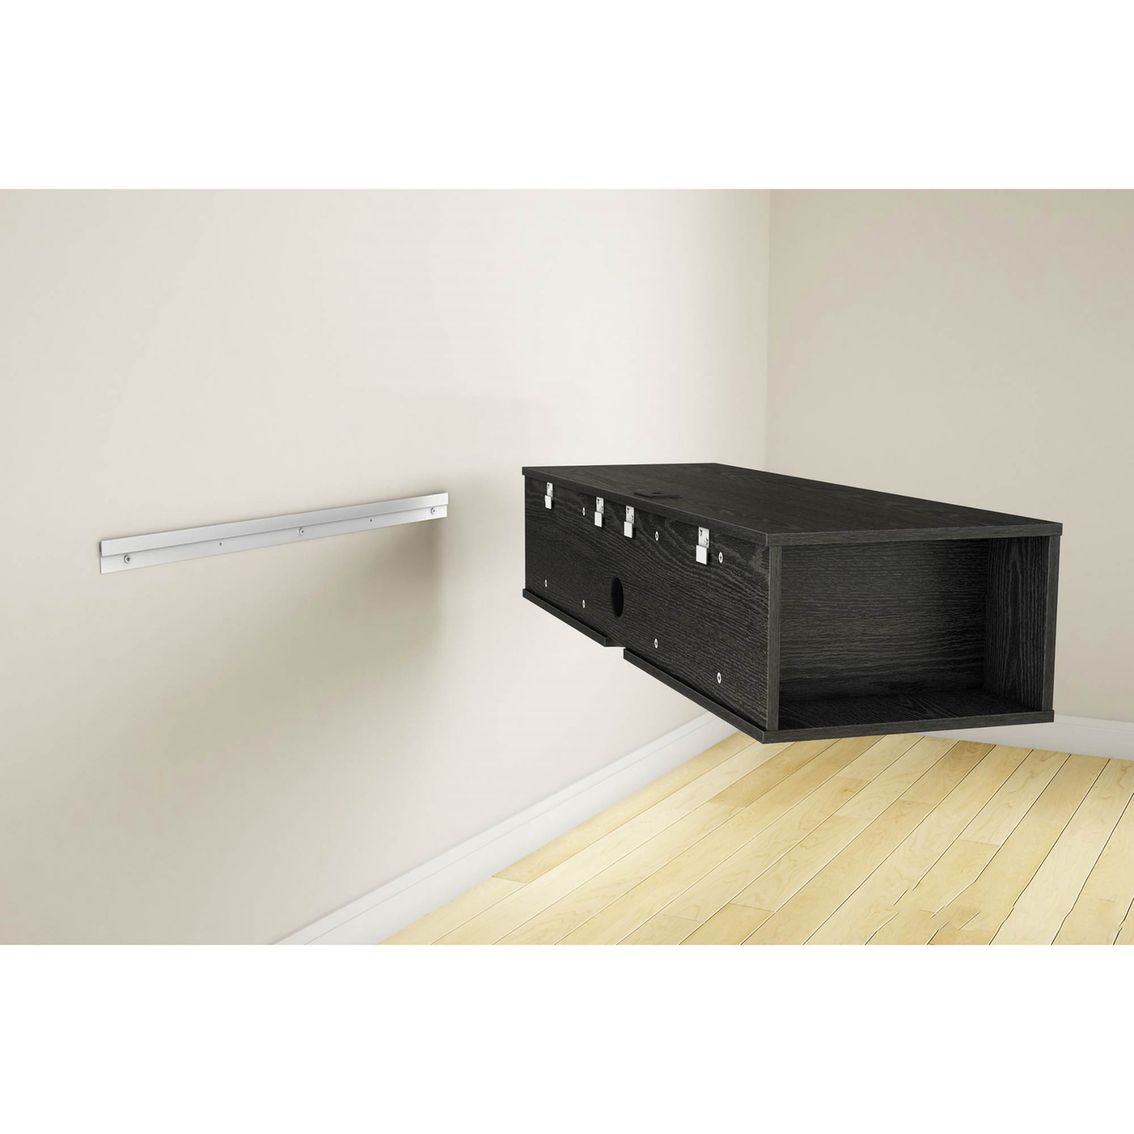 South Shore City Life Wall Mount TV Stand - Image 3 of 3